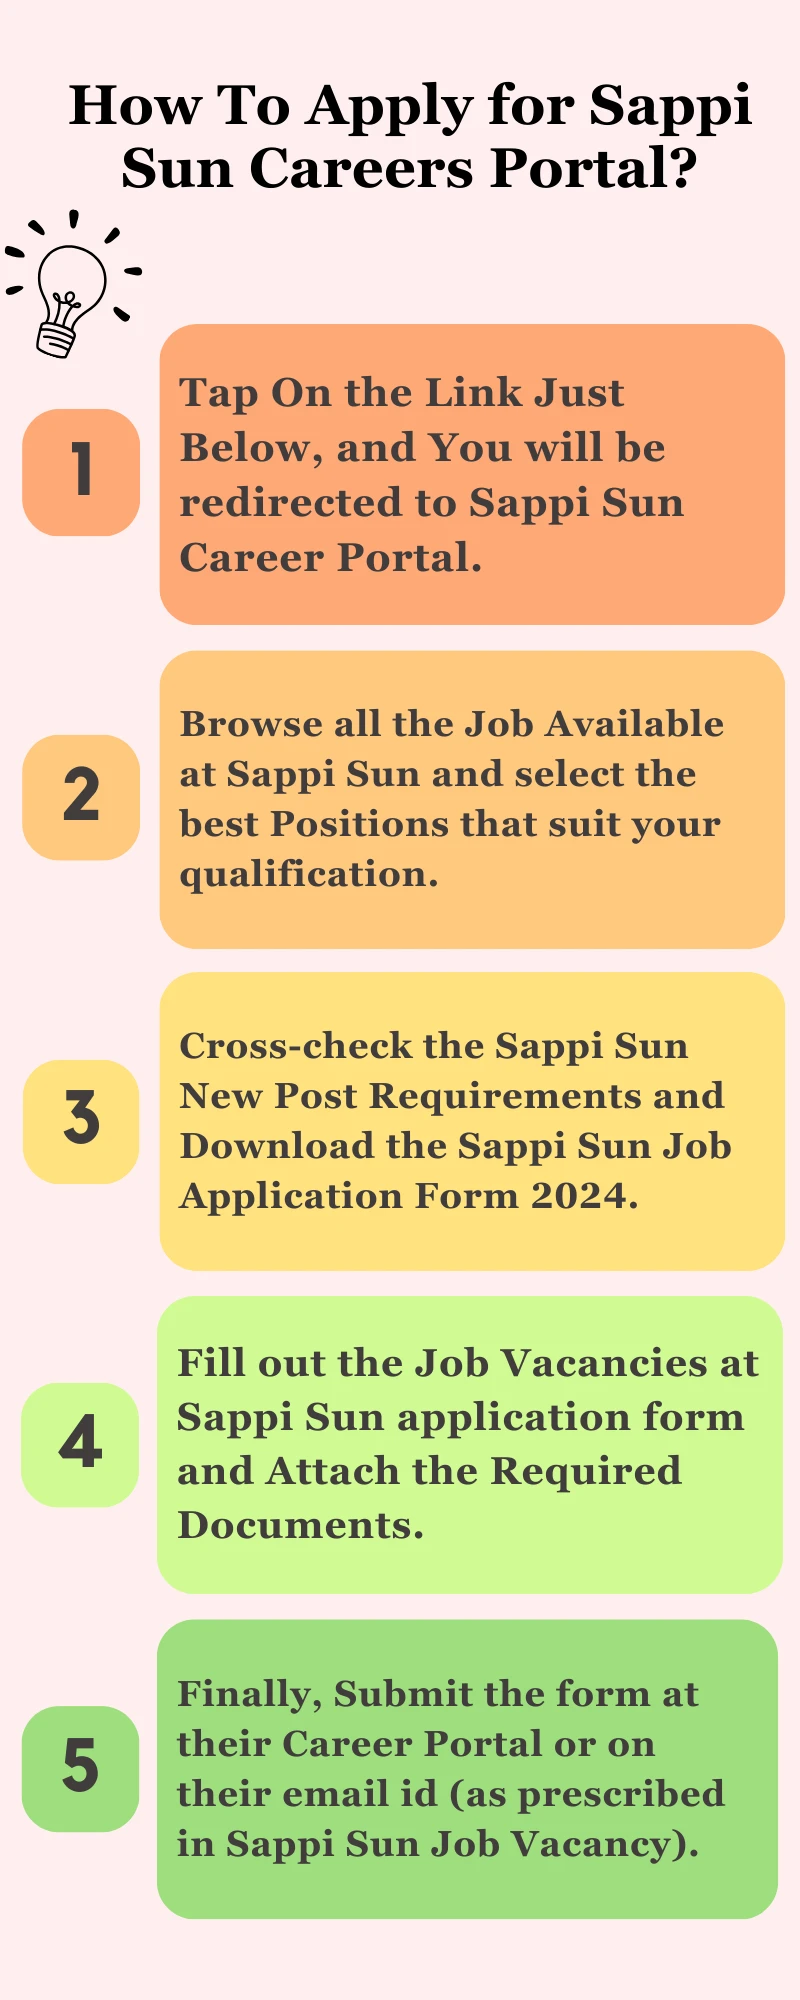 How To Apply for Sappi Sun Careers Portal?